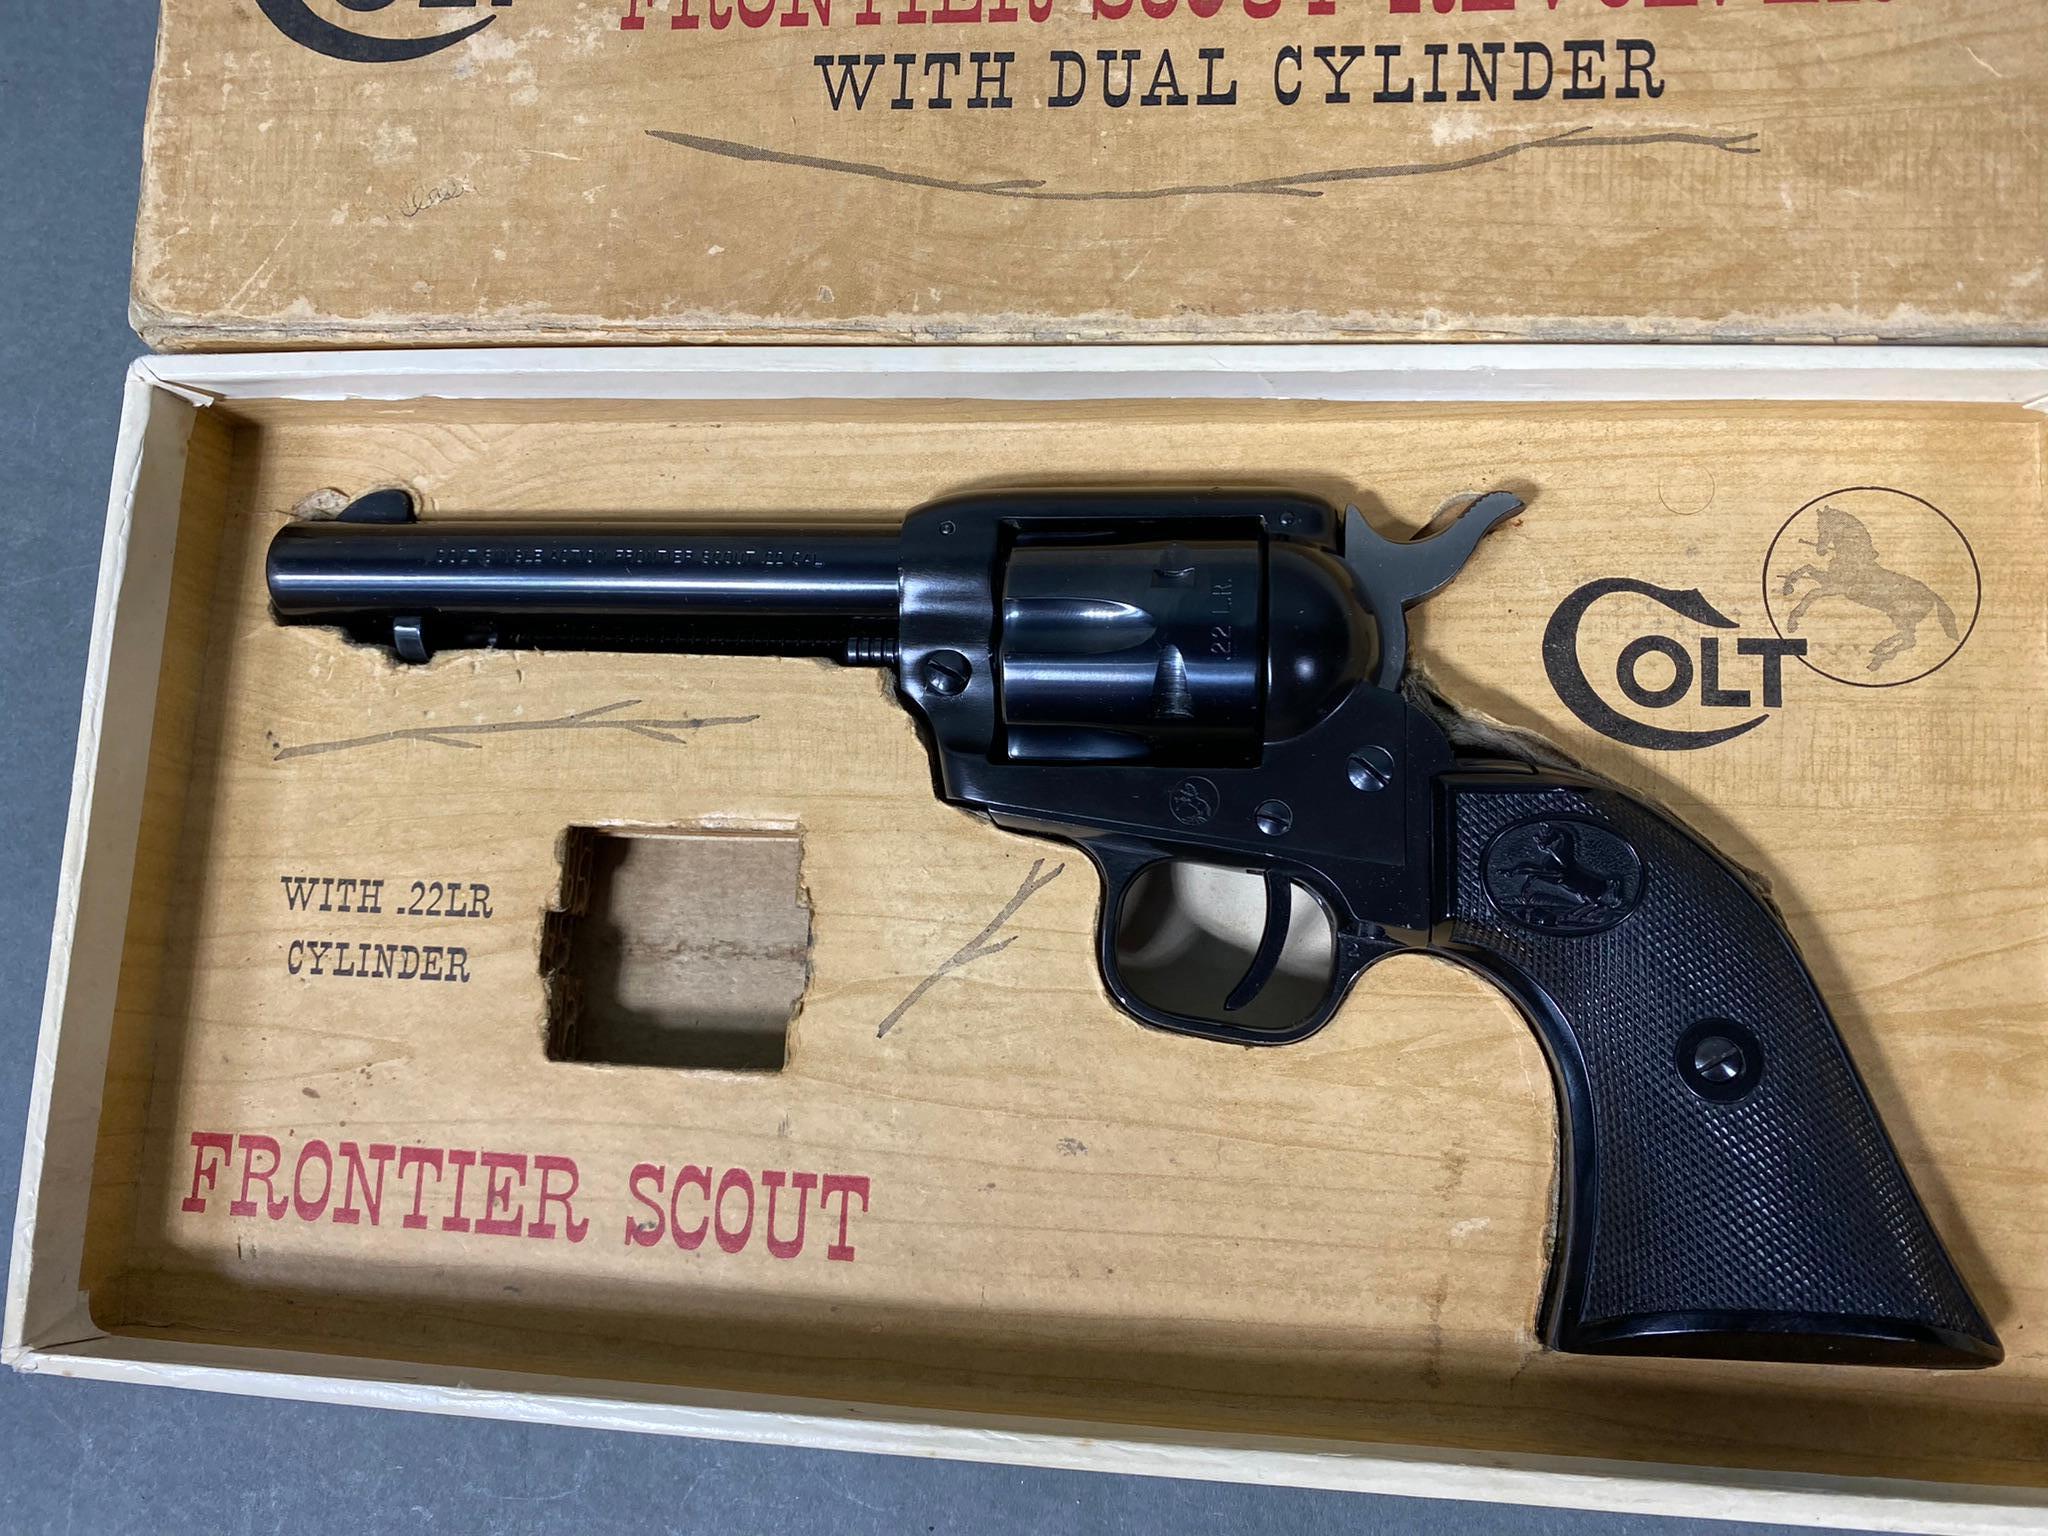 Colt Frontier Scout Revolver 22LR in Box Nice